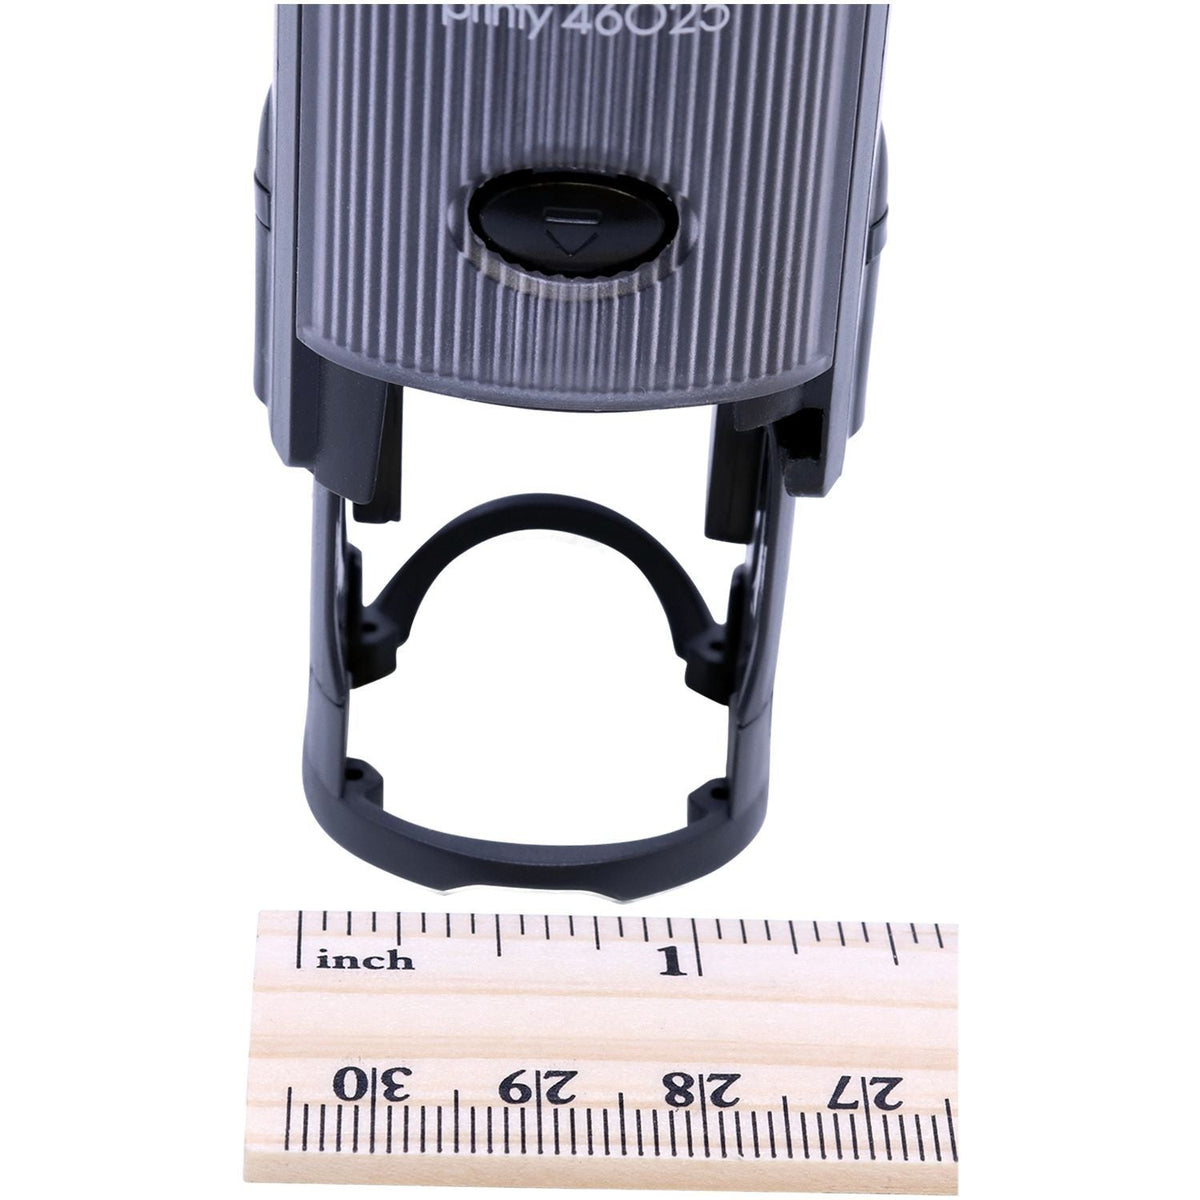 Measurment of Self-Inking Round Sad Face Stamp with Ruler